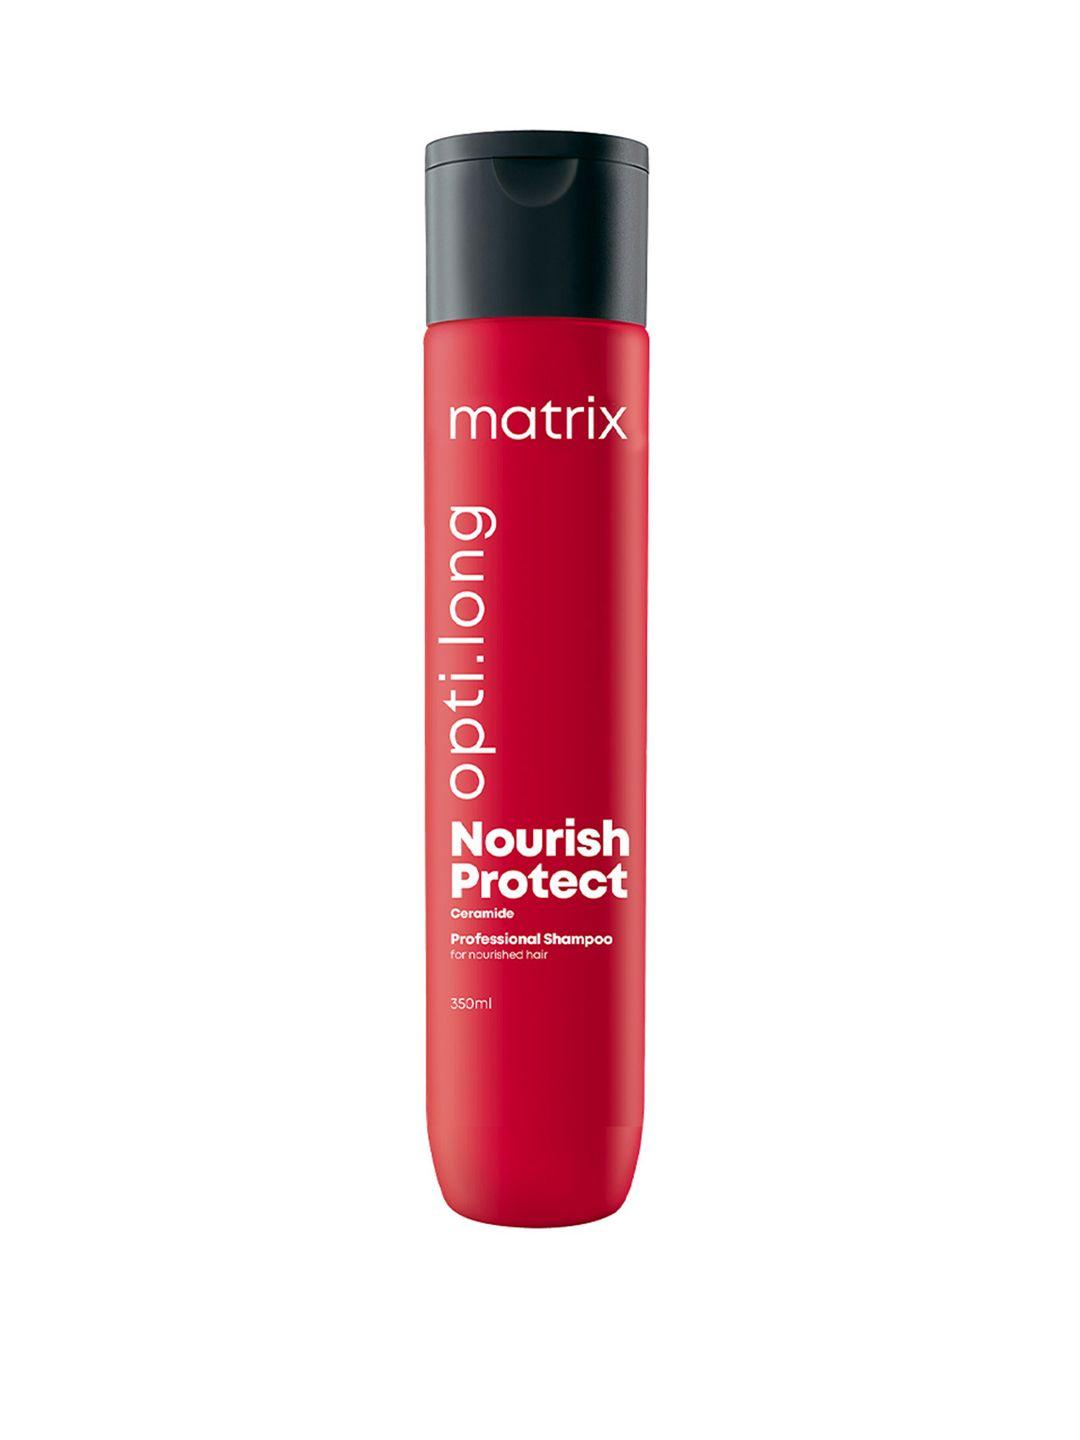 matrix opti long nourish protect shampoo with ceramide to protects from split ends - 350ml